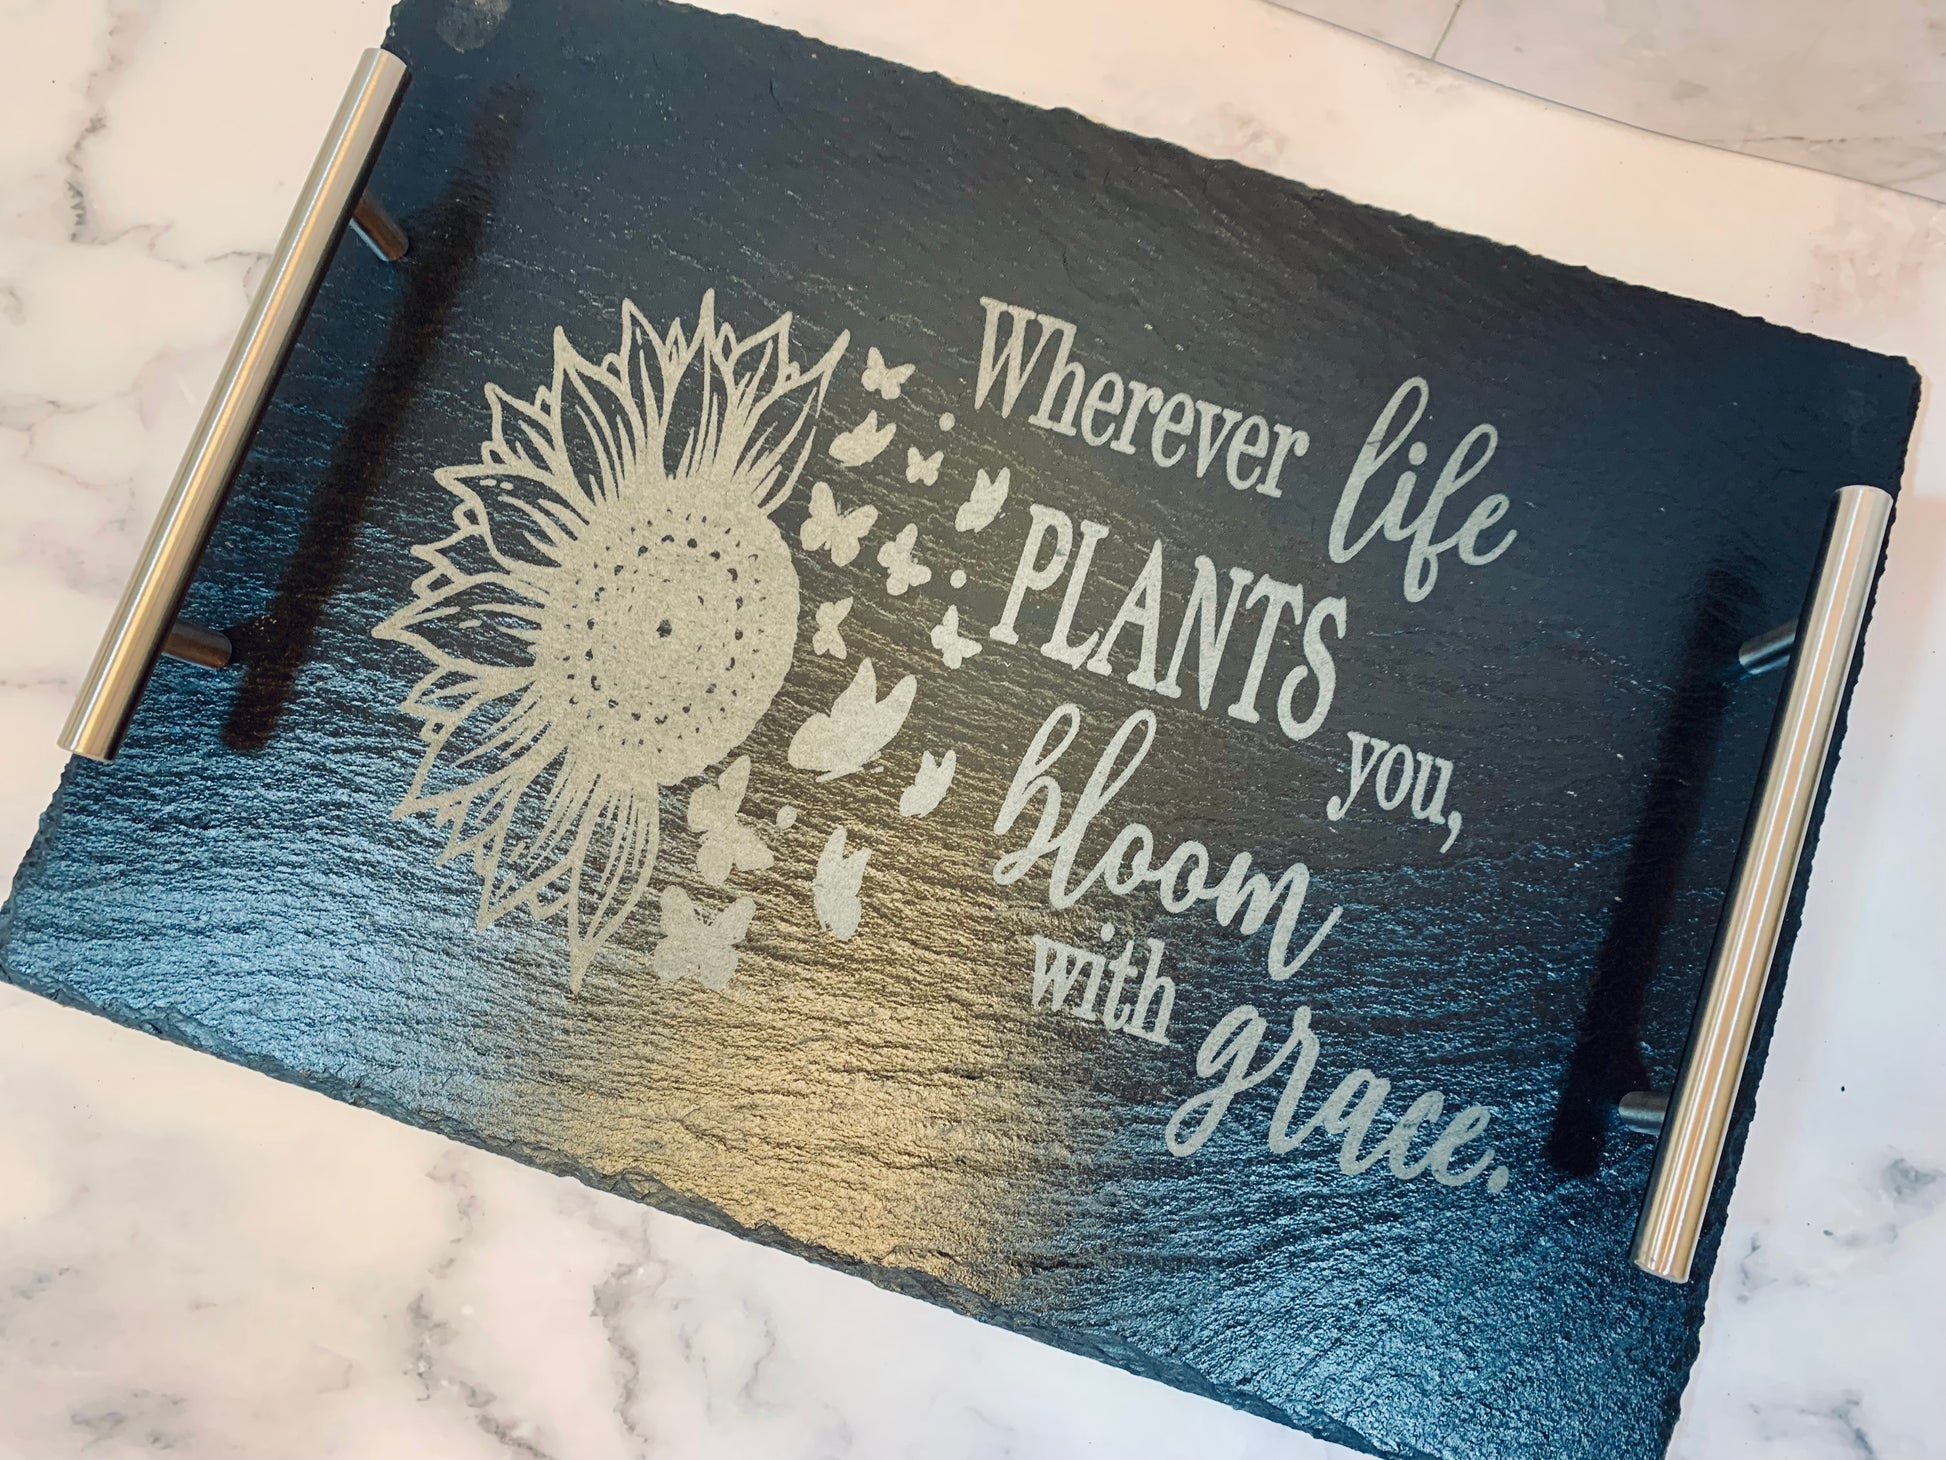 Wherever Life Plants You Bloom With Grace Sunflower Slate Tray - MixMatched Creations